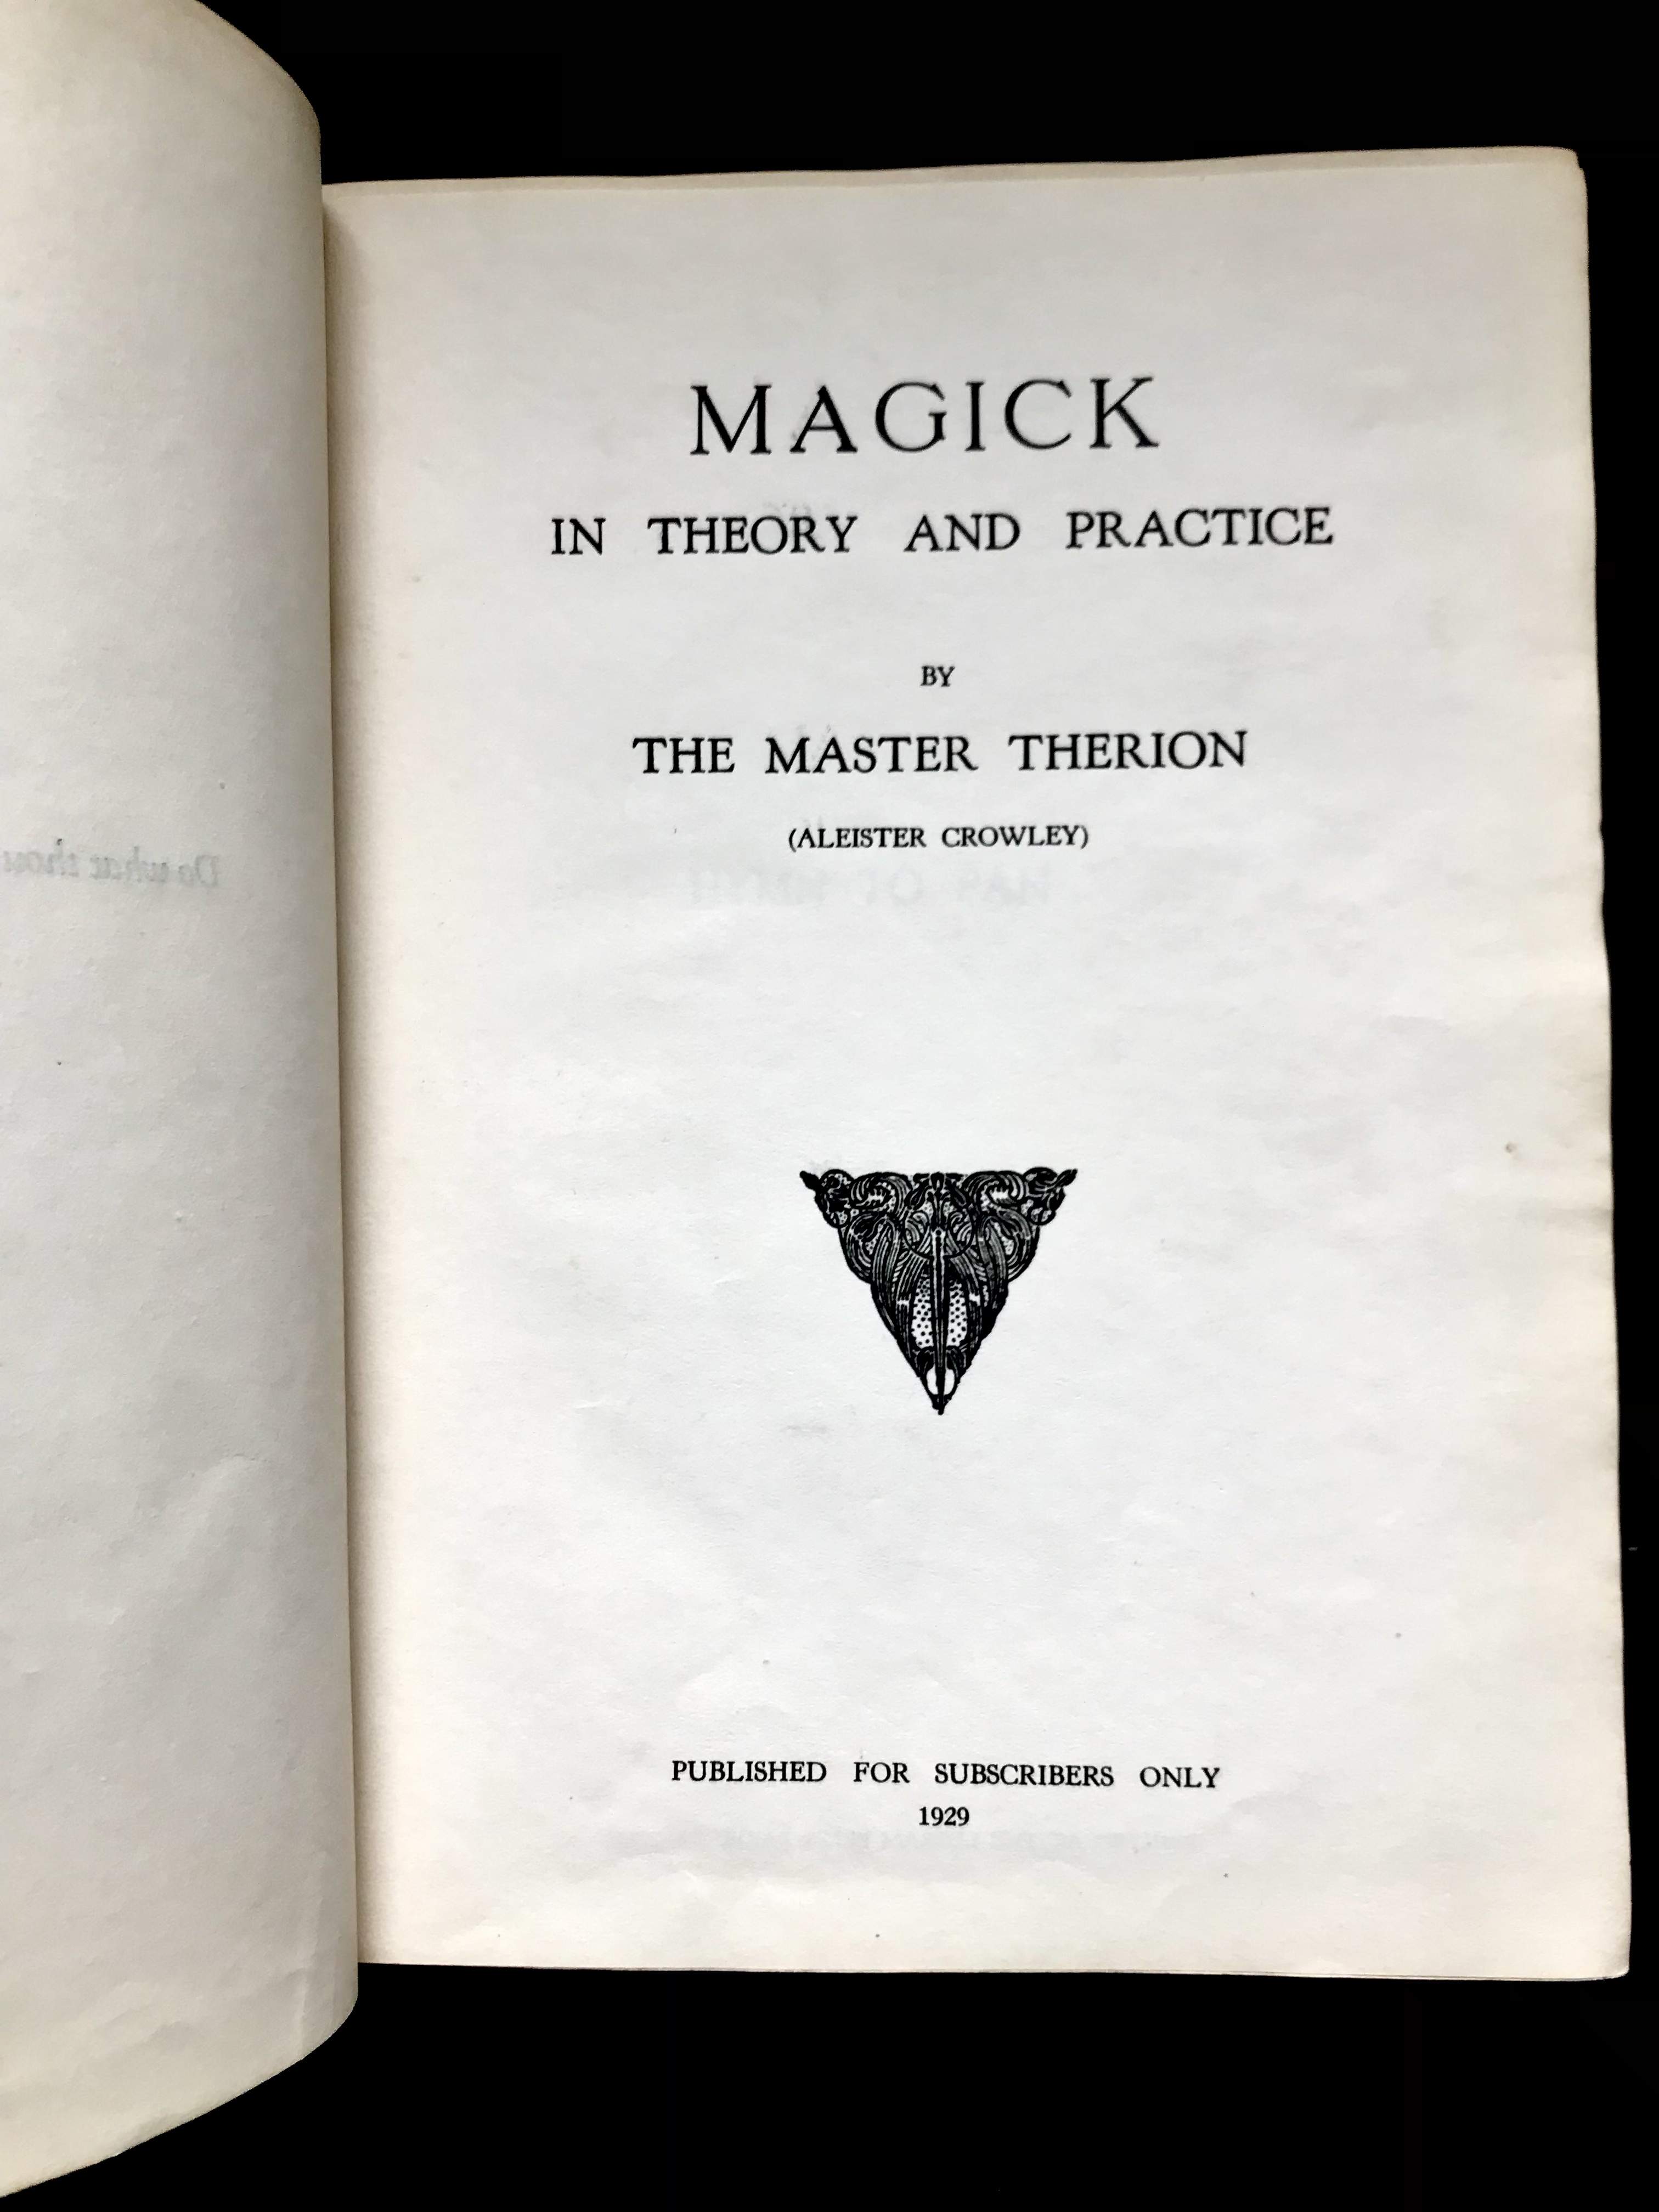 Magick In Theory and Practice  (or Liber ABA, Book 4) by Aleister Crowley